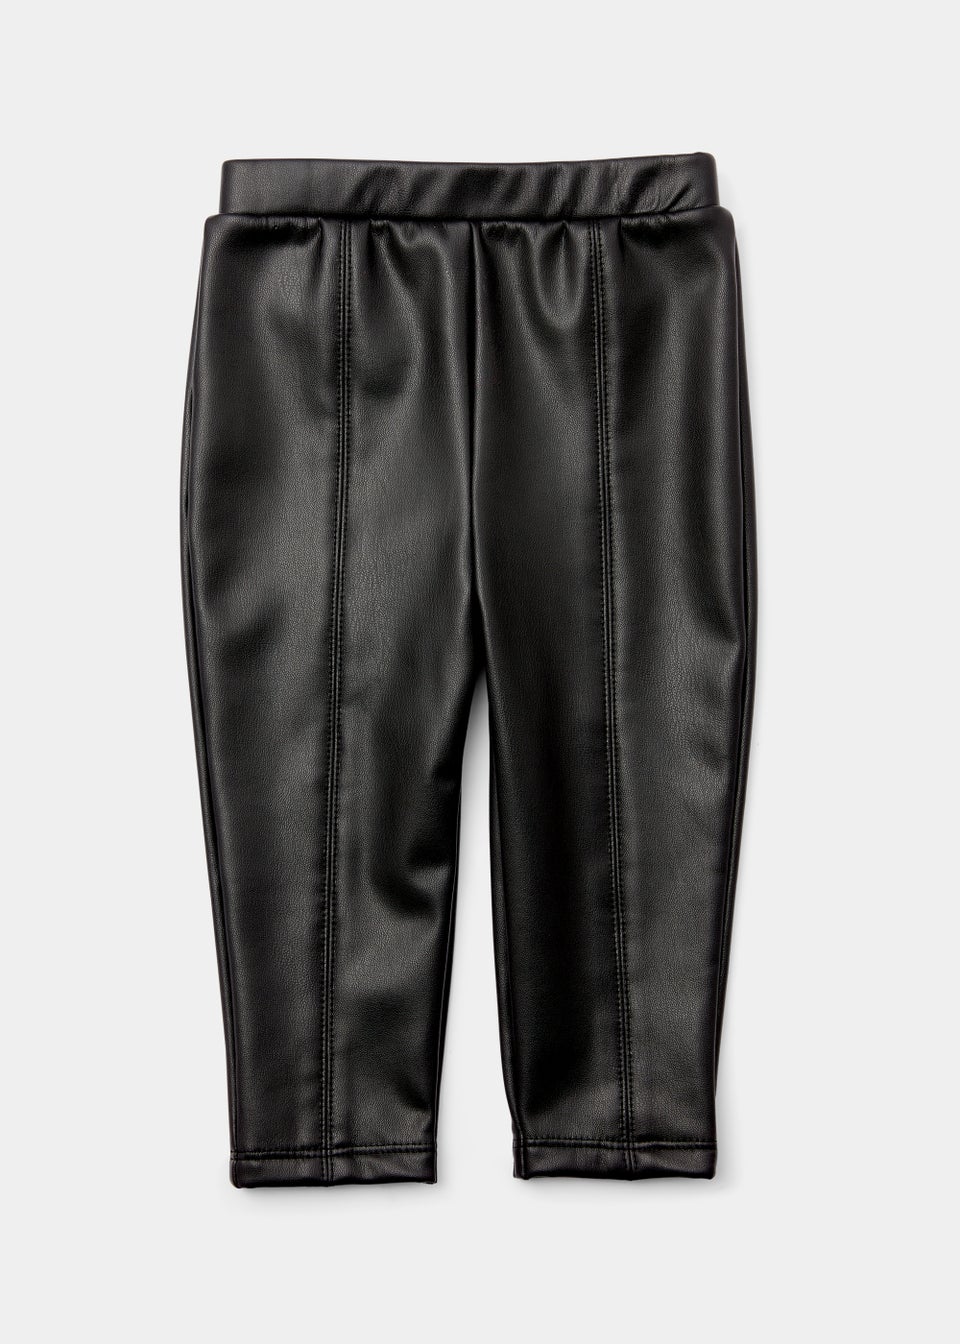 Girls Black Leather-Look Trousers (9mths-6yrs) - Matalan